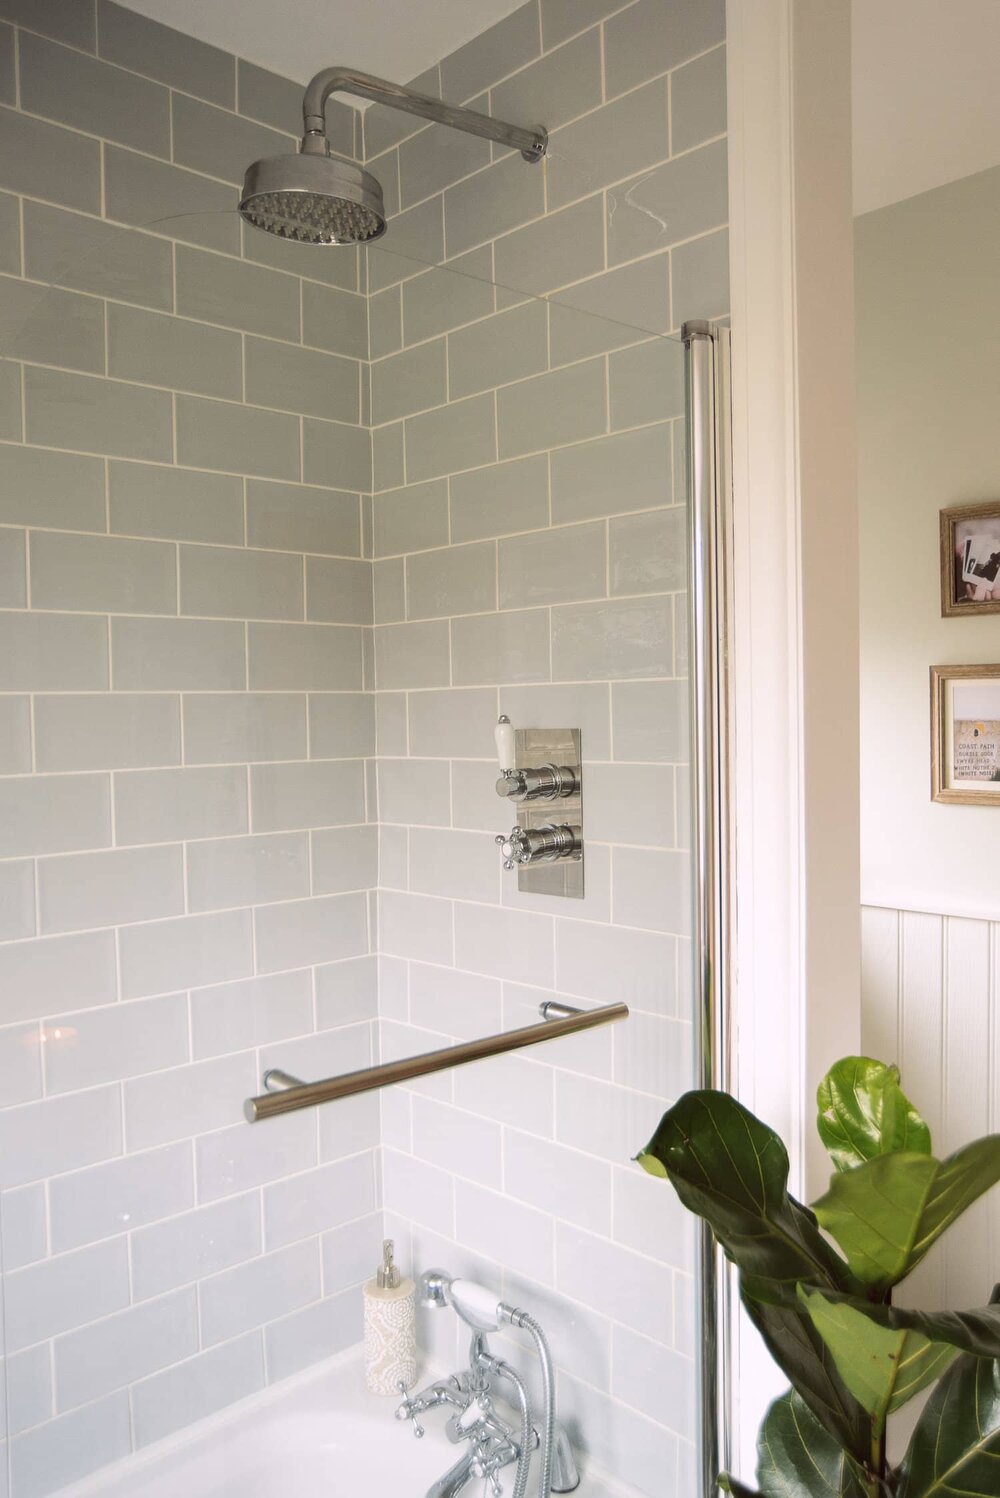 A Bathroom Renovation Cost, How Much Does A Small Bathroom Renovation Cost Uk